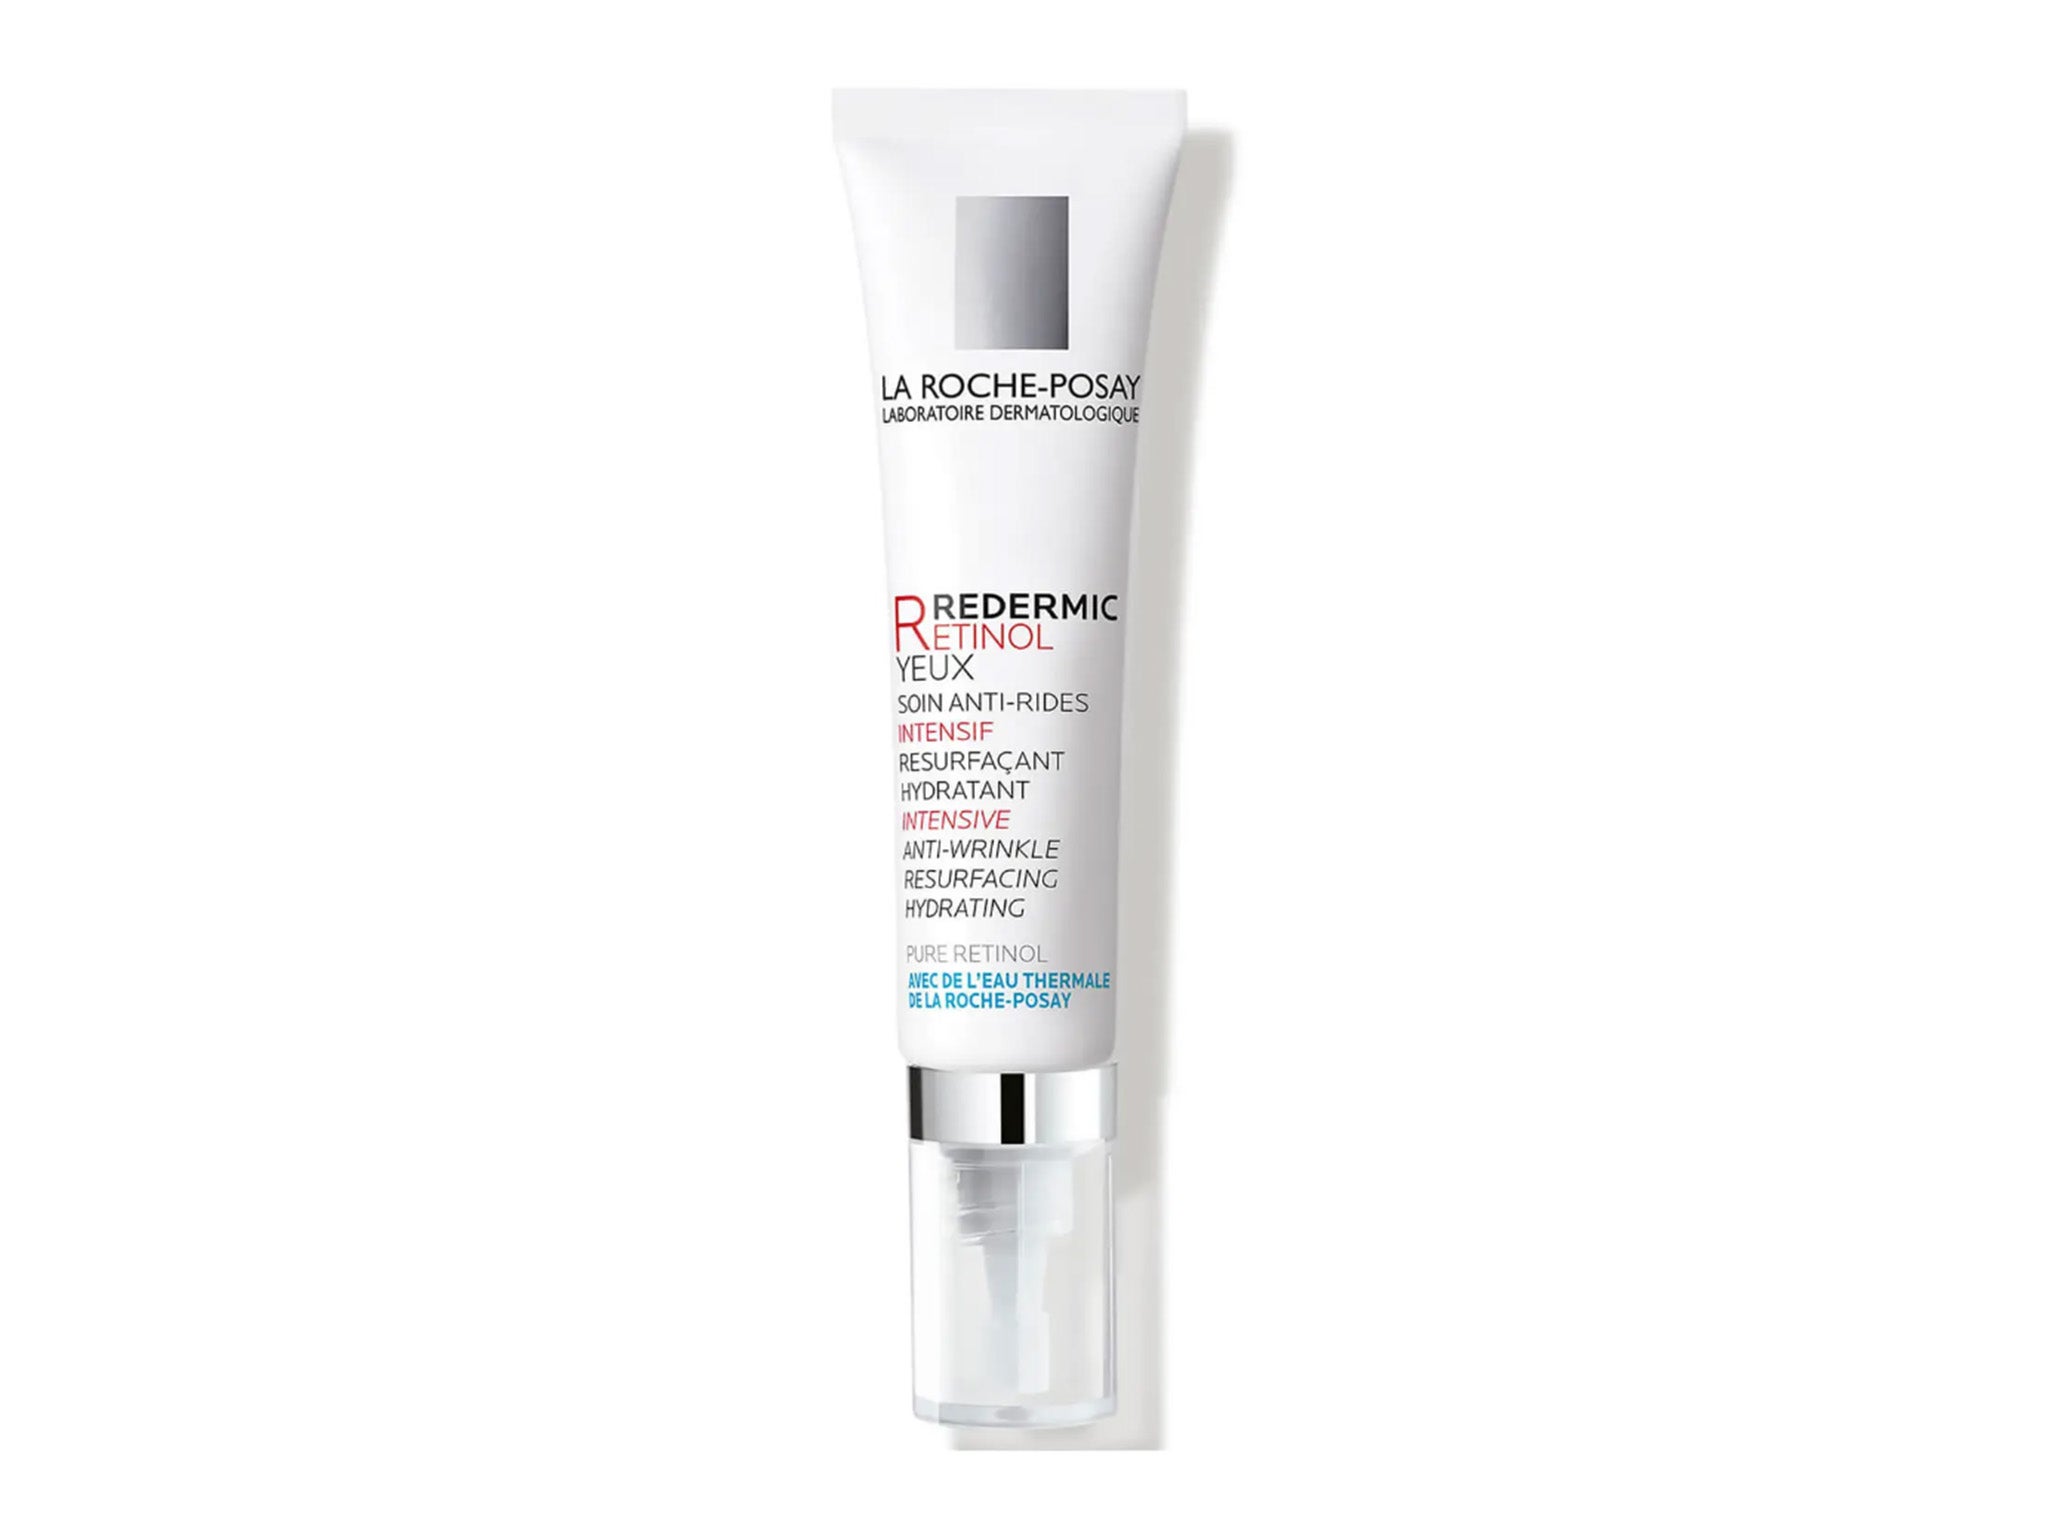 La Roche-Posay redermic R eyes anti-ageing concentrate